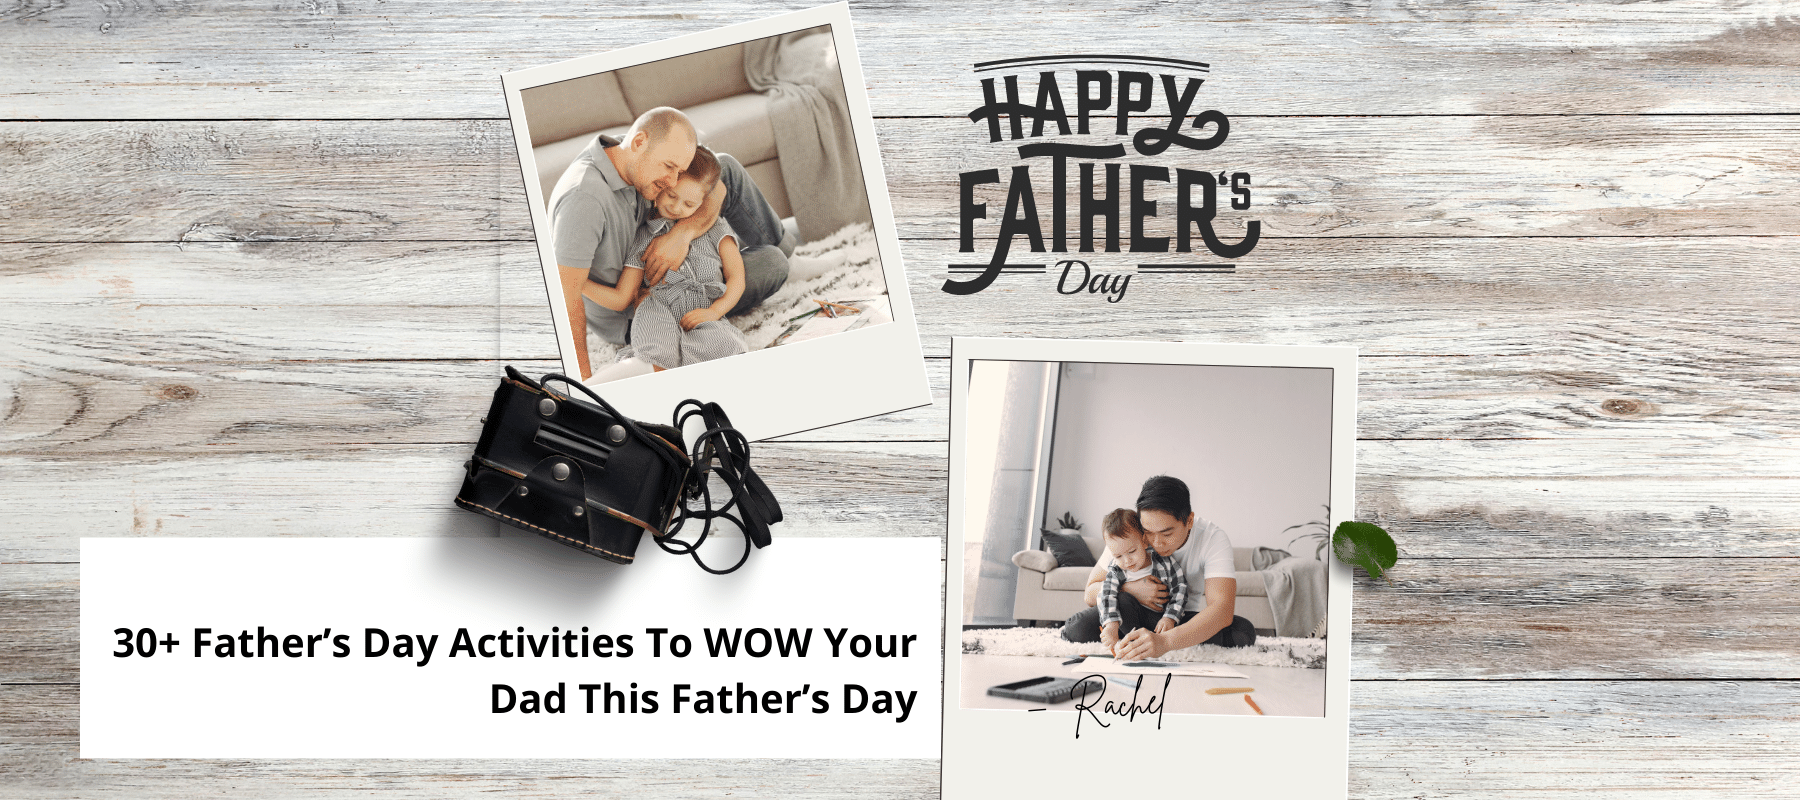 30+ Father’s Day Activities to WOW your dad this Father’s Day